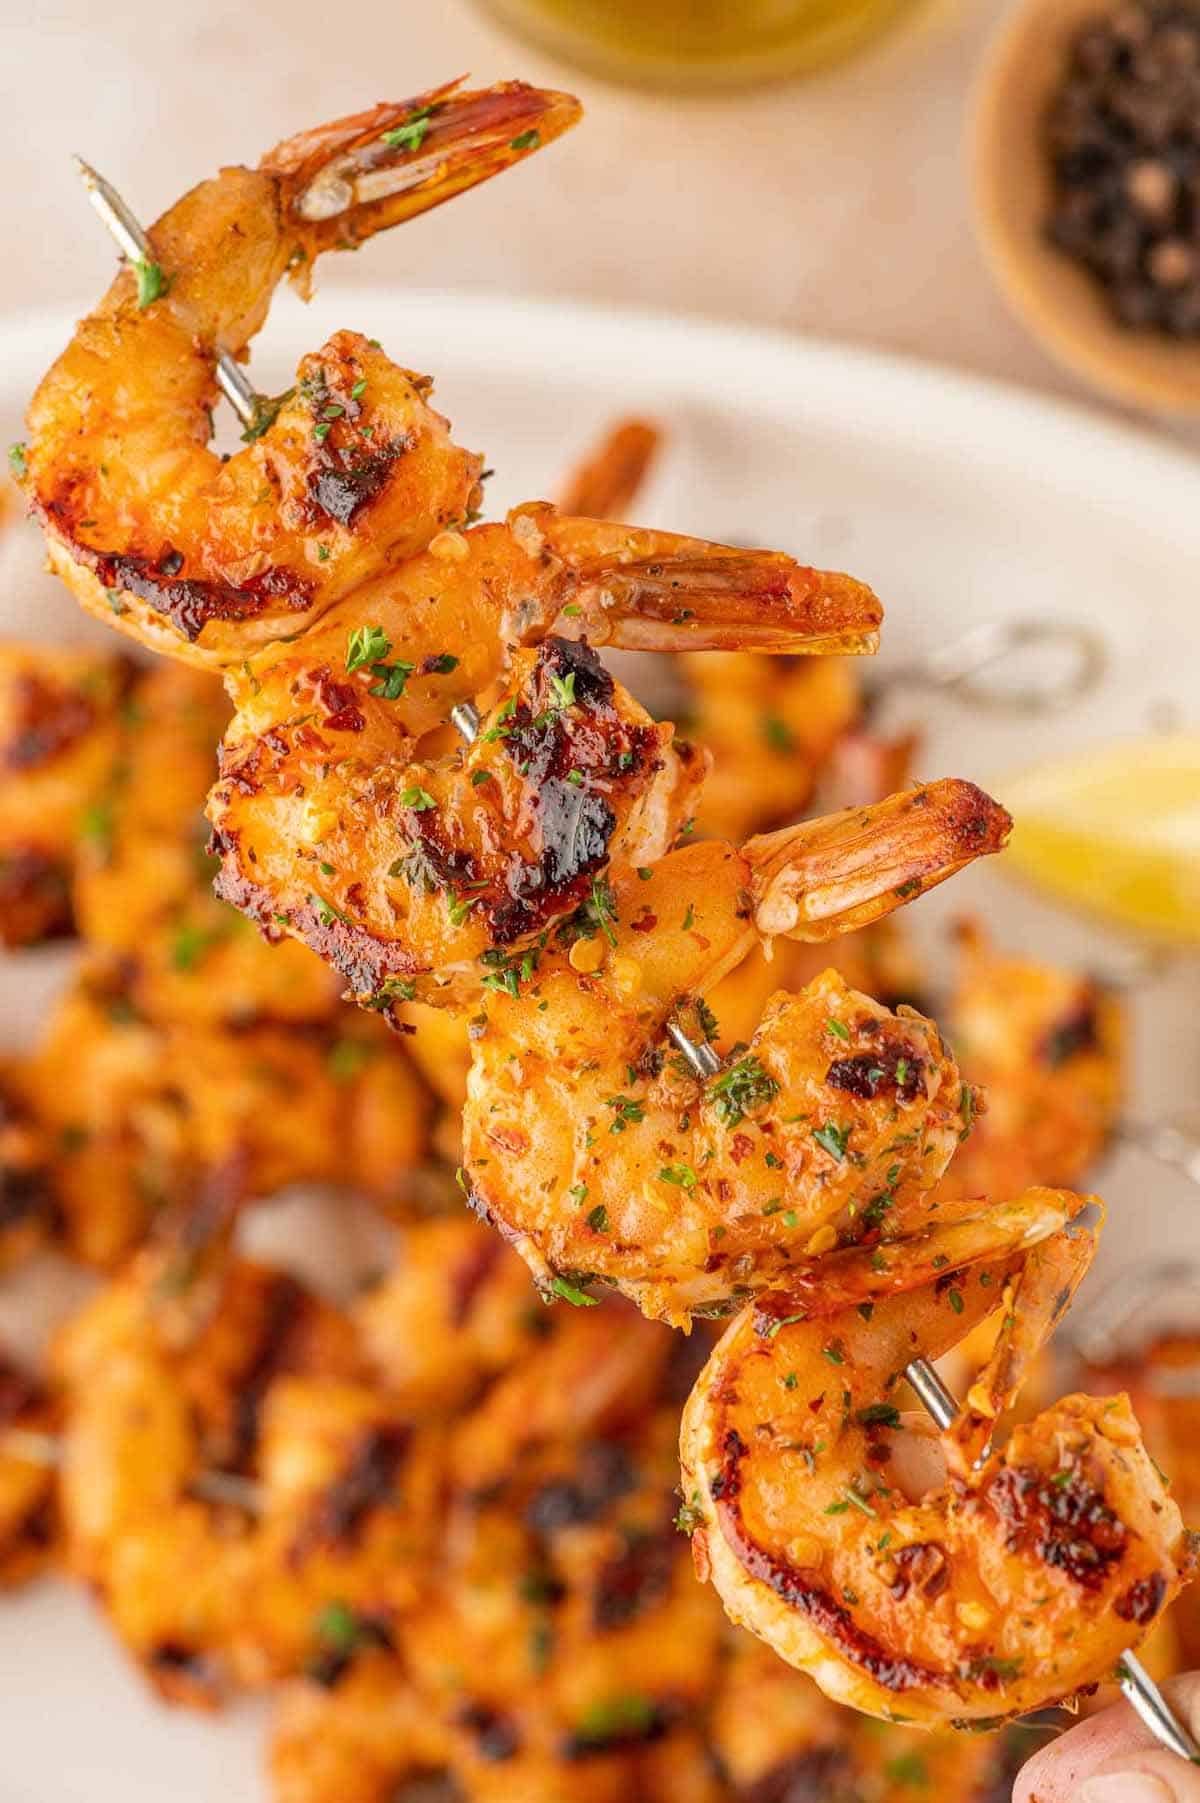 A skewer with grilled shrimp being held.